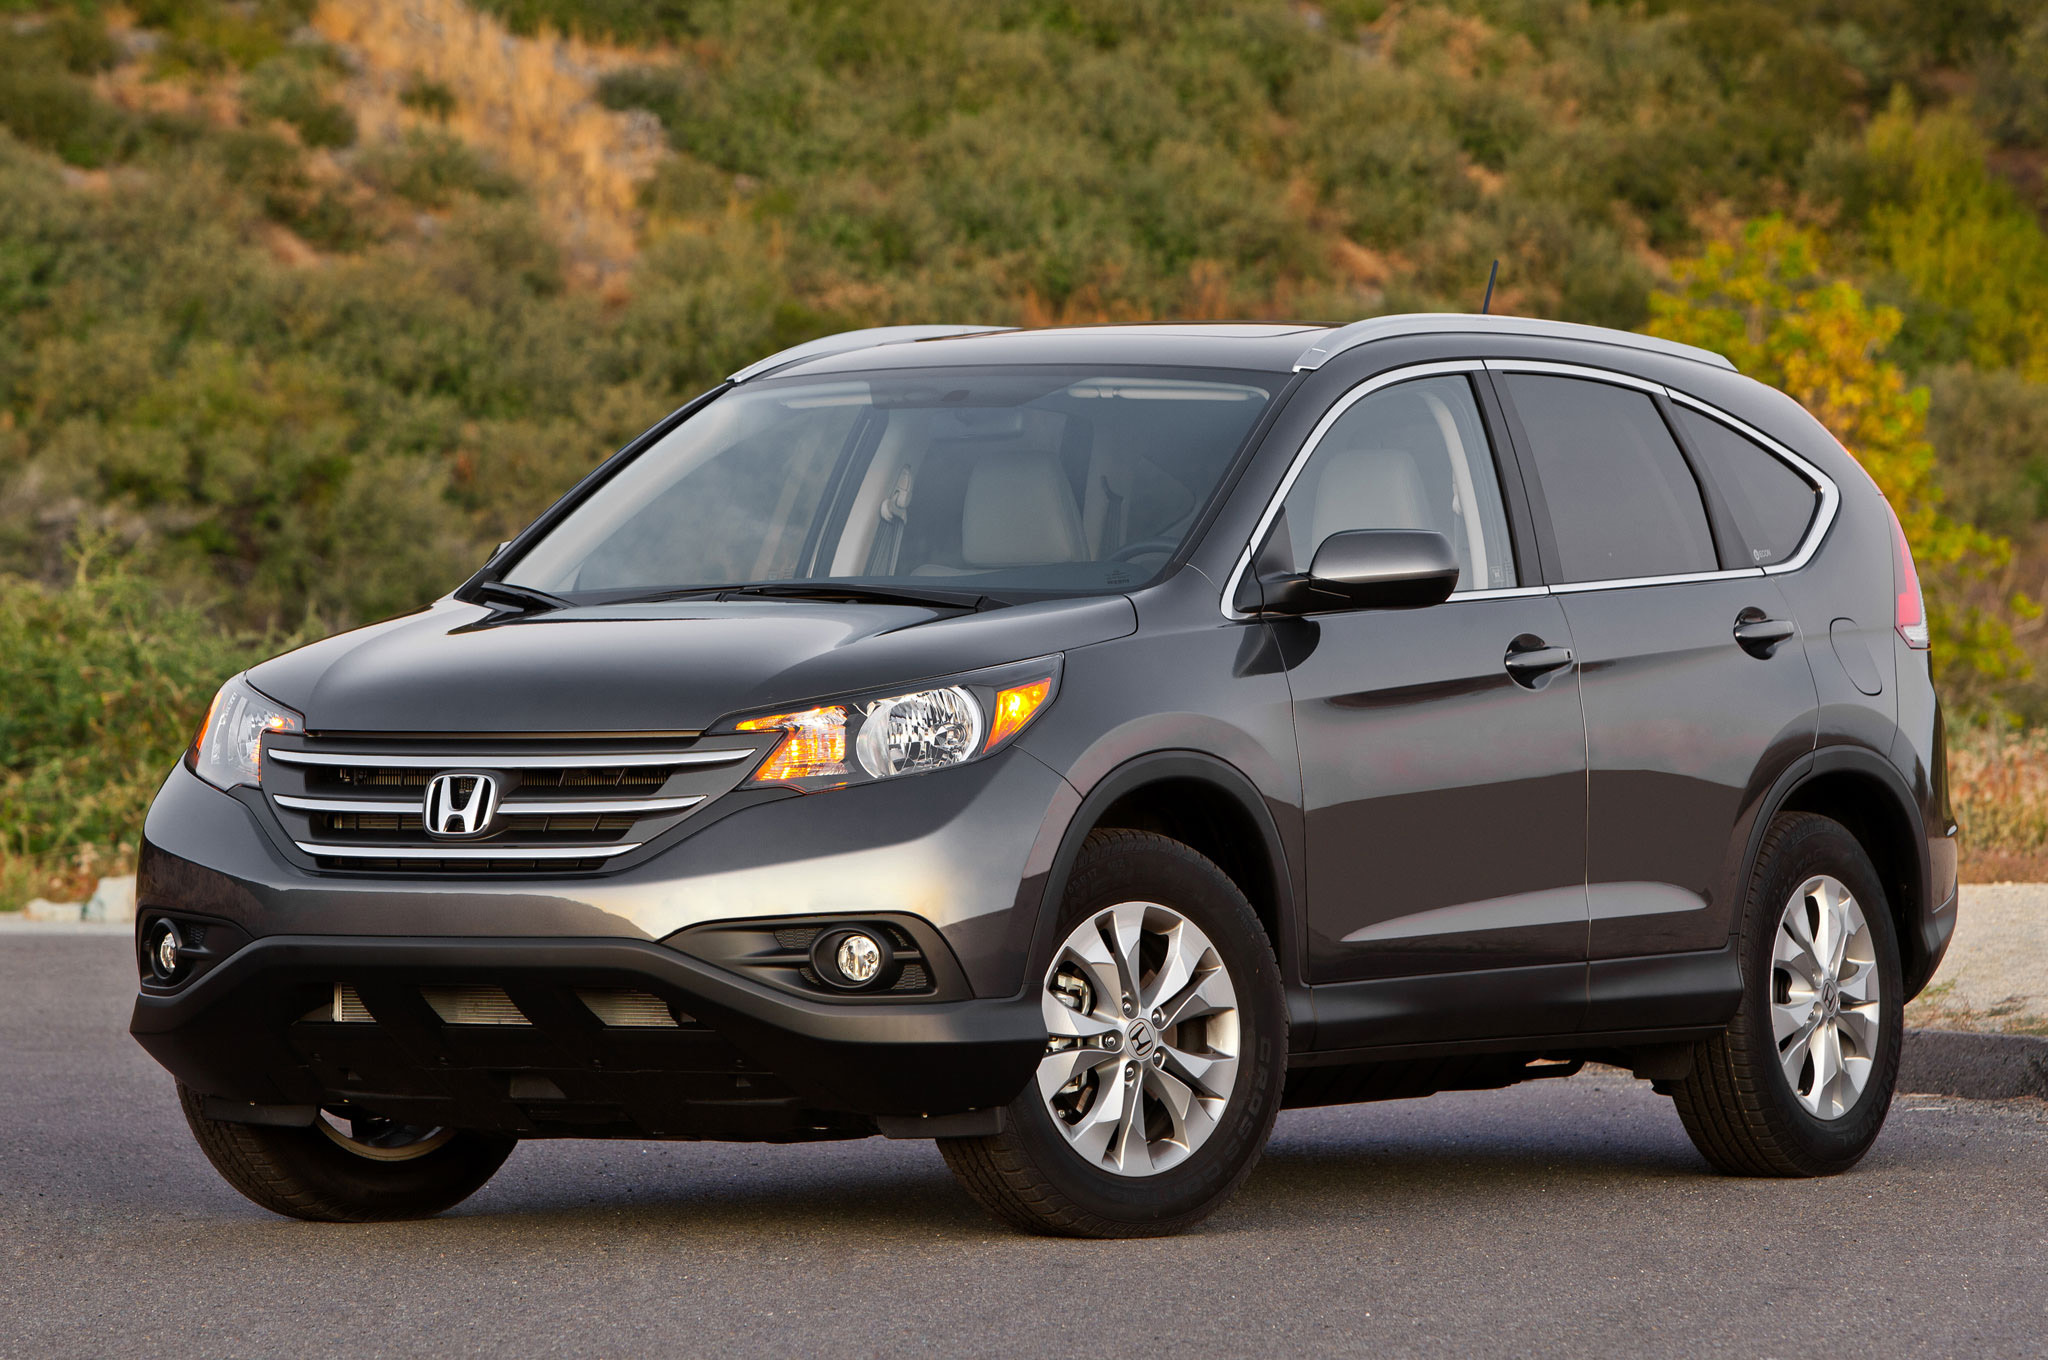 Honda CRV Review The Compact Crossover To Get Things Done